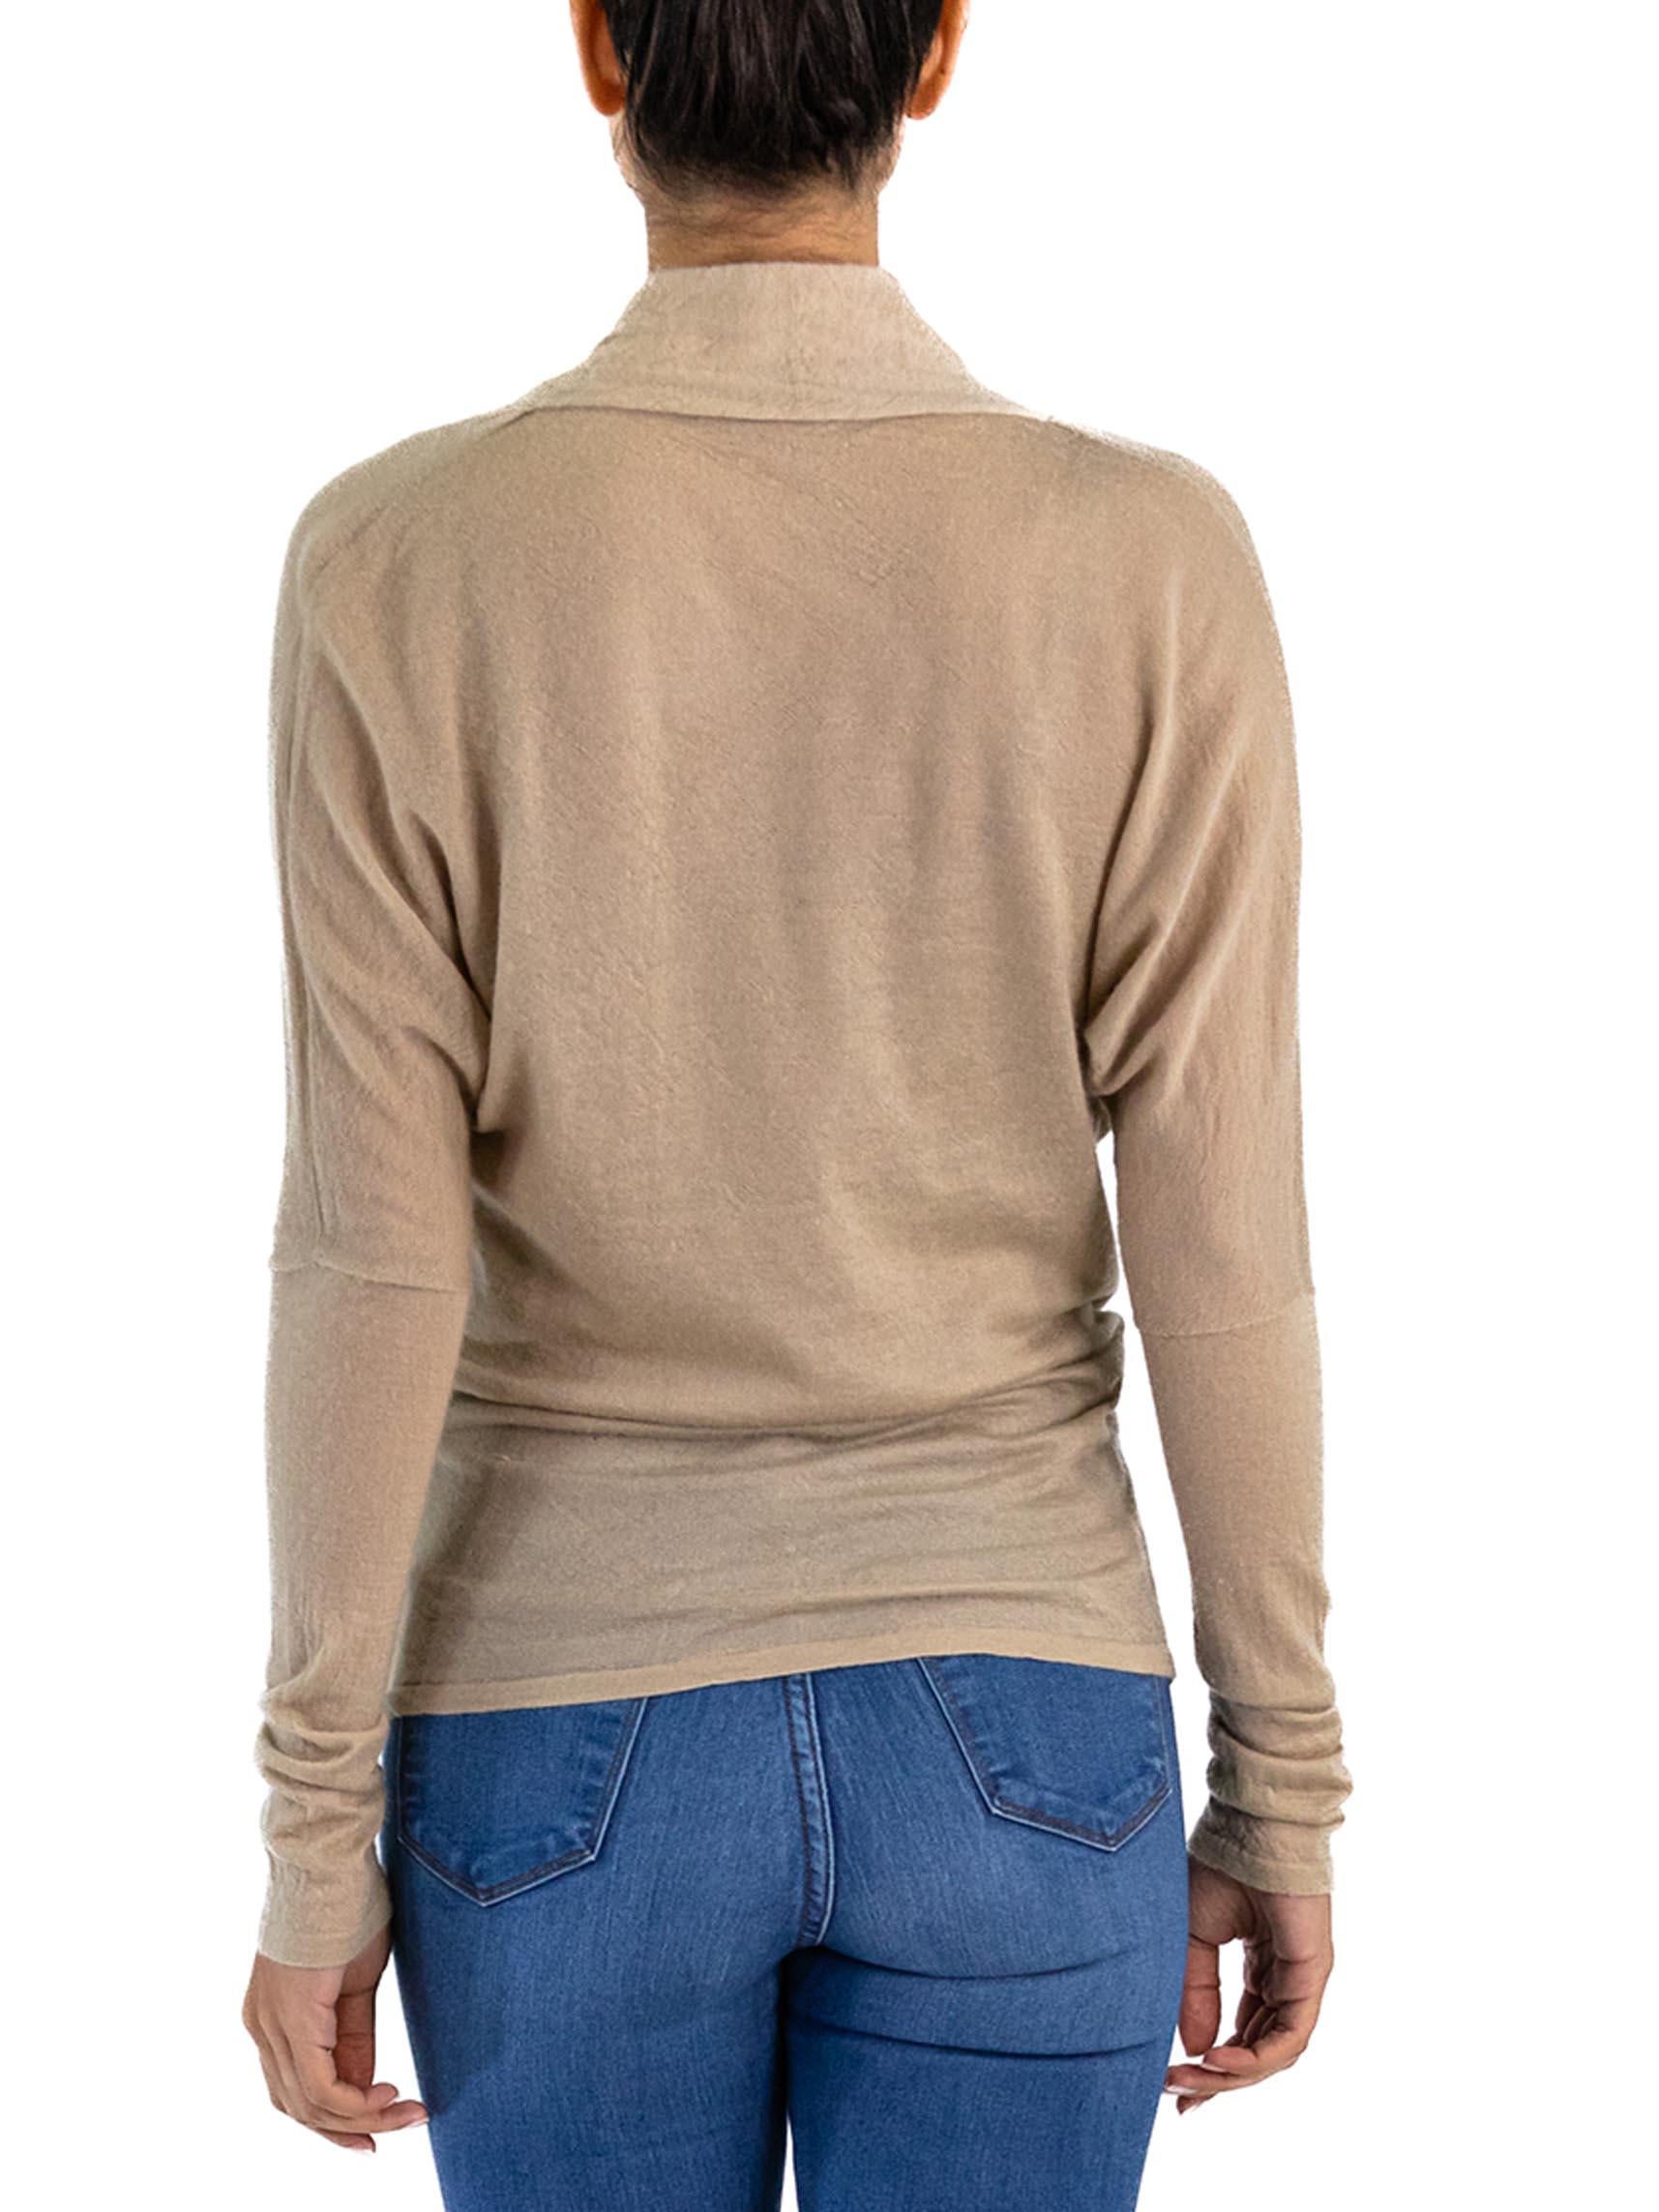 2000S TOM FORD GUCCI Biege Cashmere Textural Knit Low Cut Sweater For Sale 4